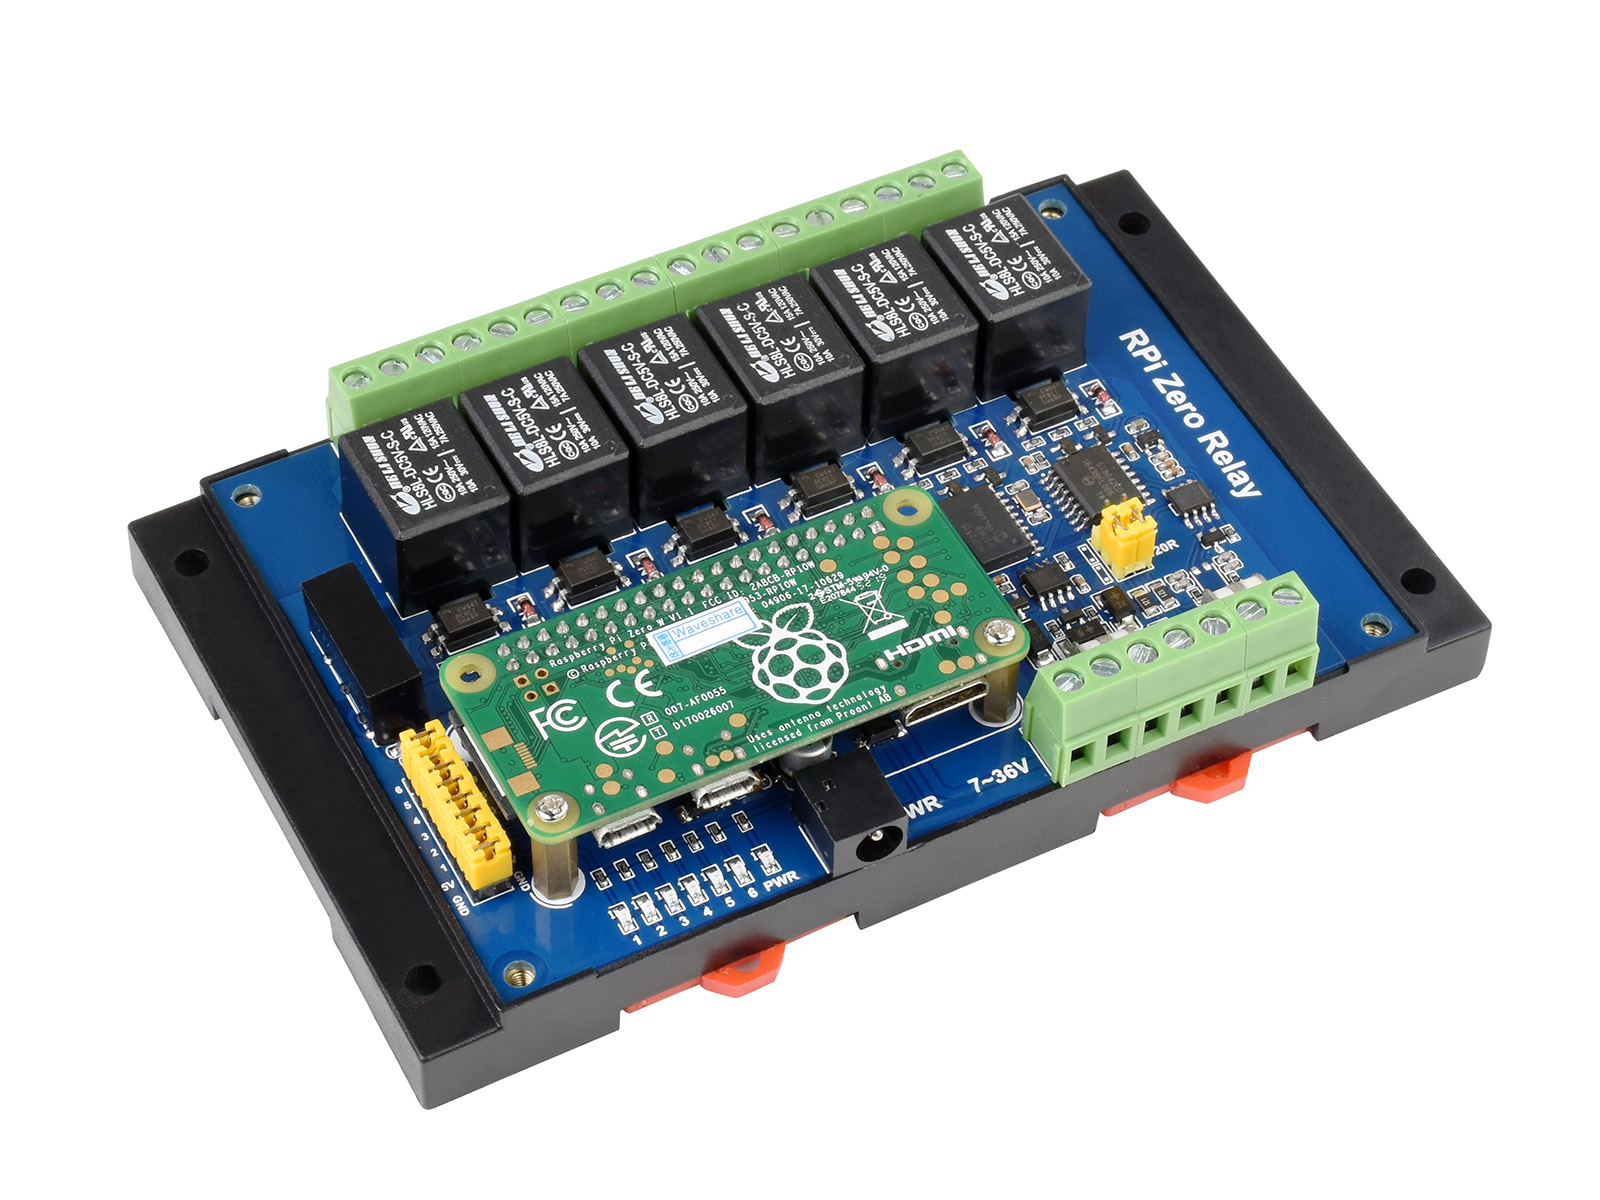 Industrial 6-ch Relay Module for Raspberry Pi Zero, RS485/CAN, Isolated Protections